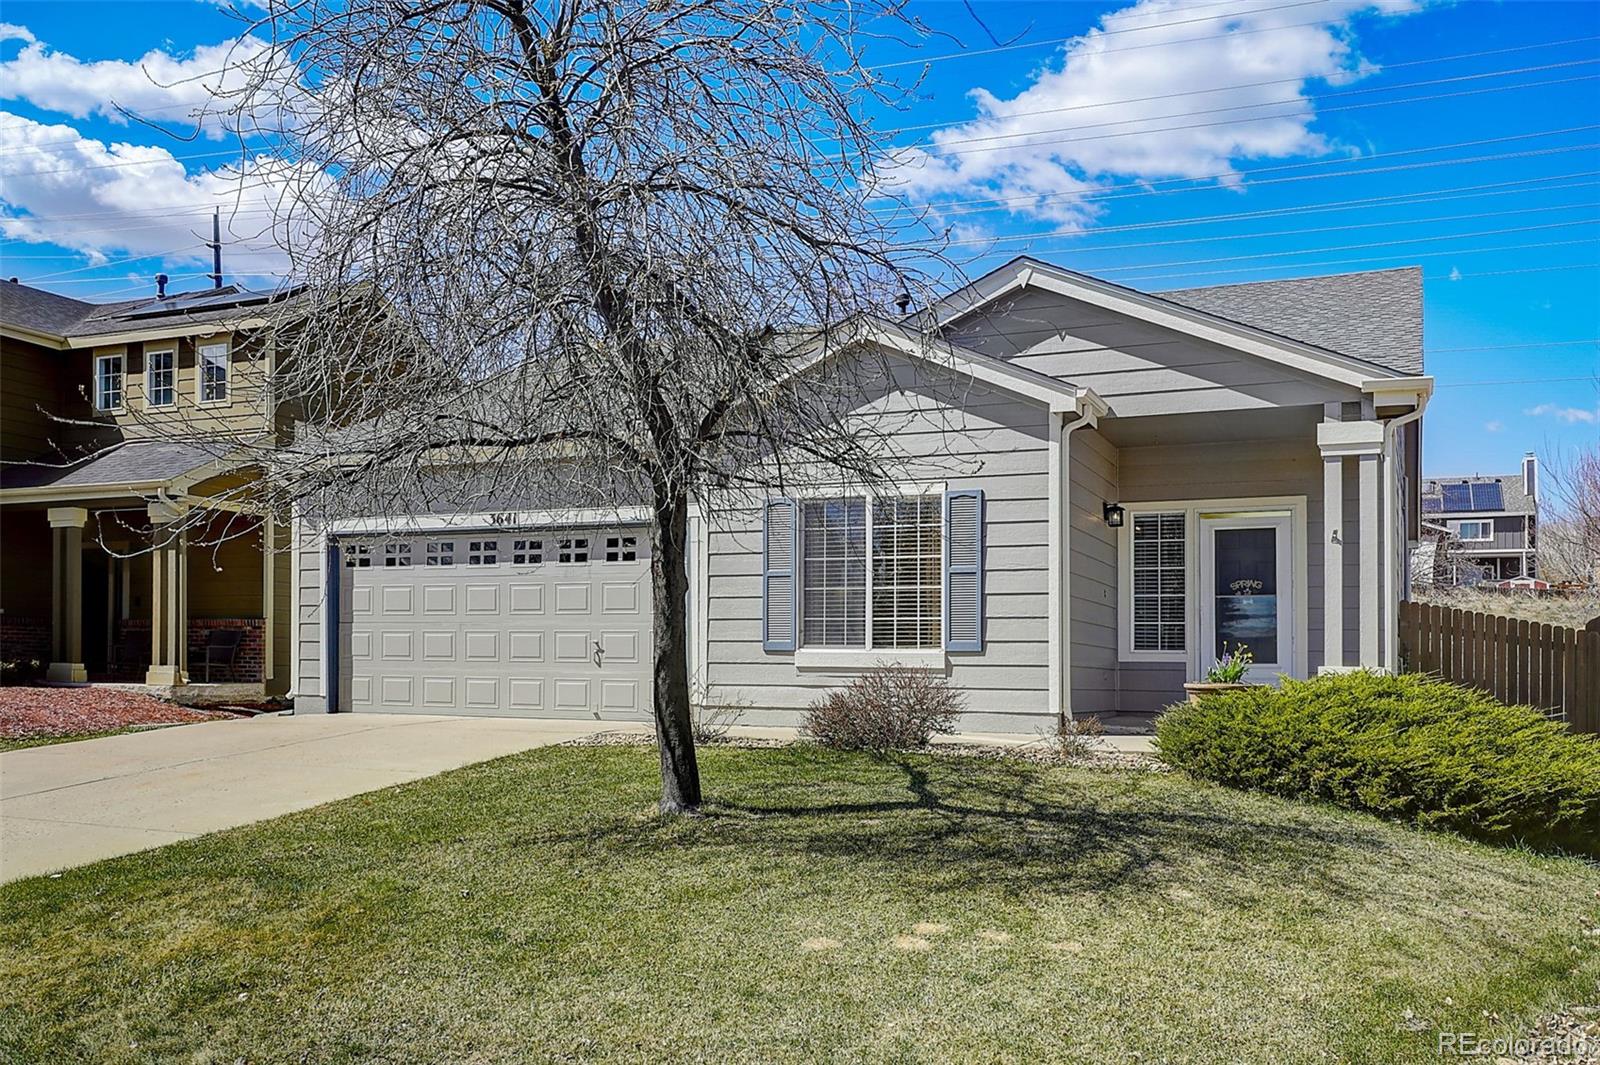 3641 s himalaya court, Aurora sold home. Closed on 2024-05-22 for $480,000.